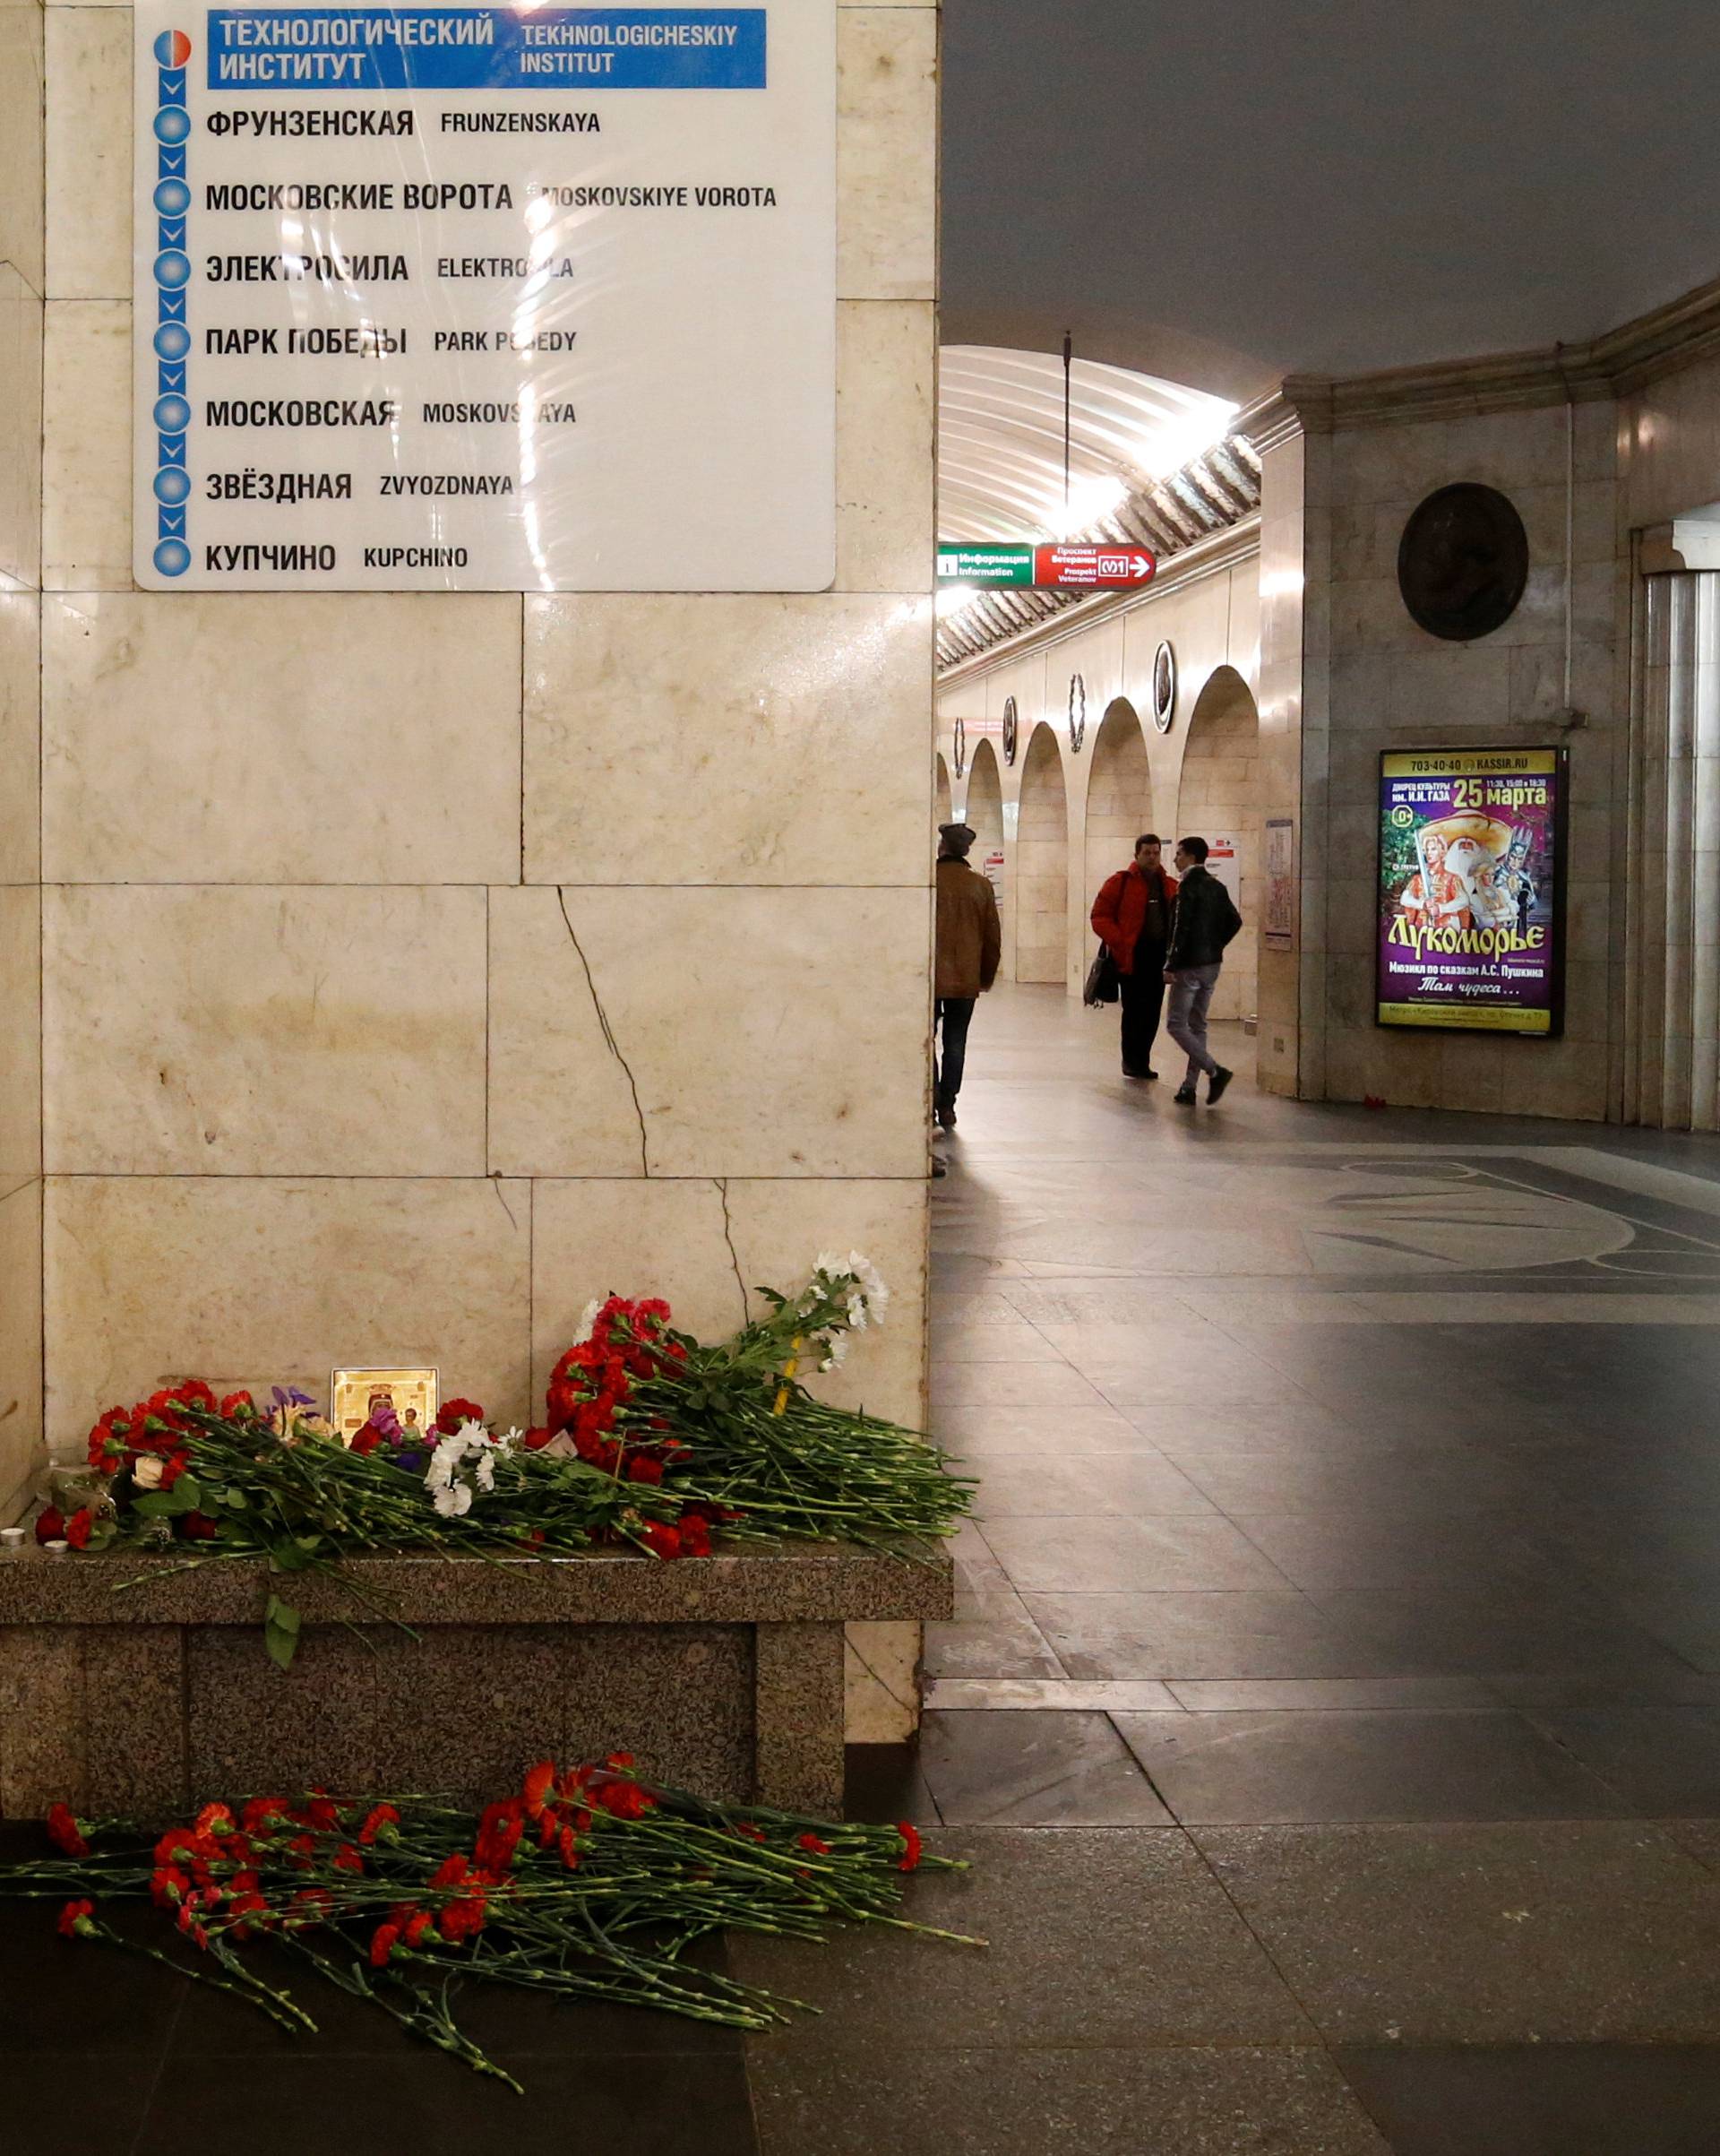 A man reacts next to a memorial site for the victims of a blast in St. Petersburg metro, at Tekhnologicheskiy institut metro station in St. Petersburg